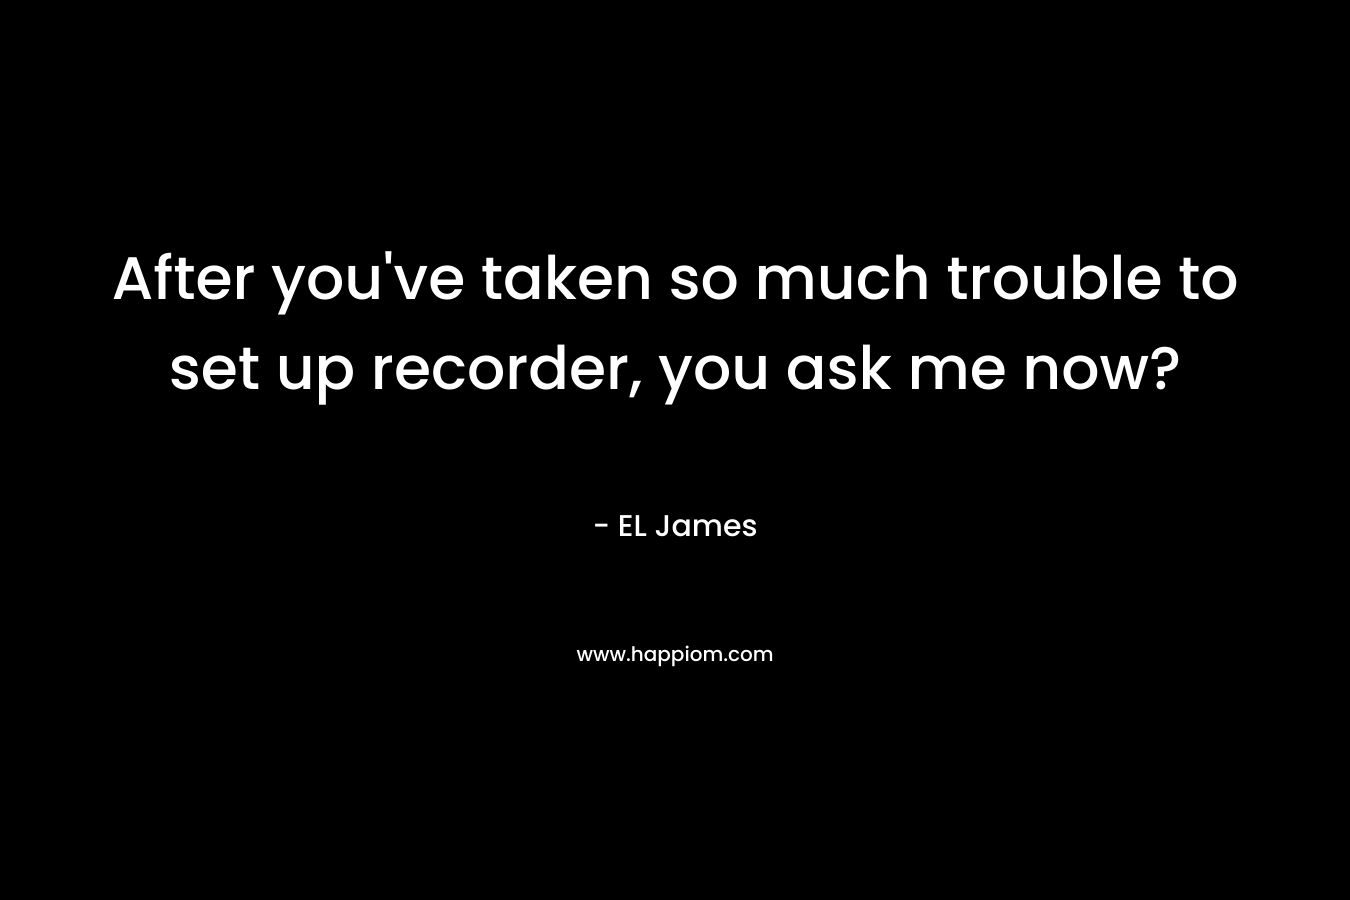 After you’ve taken so much trouble to set up recorder, you ask me now? – EL James